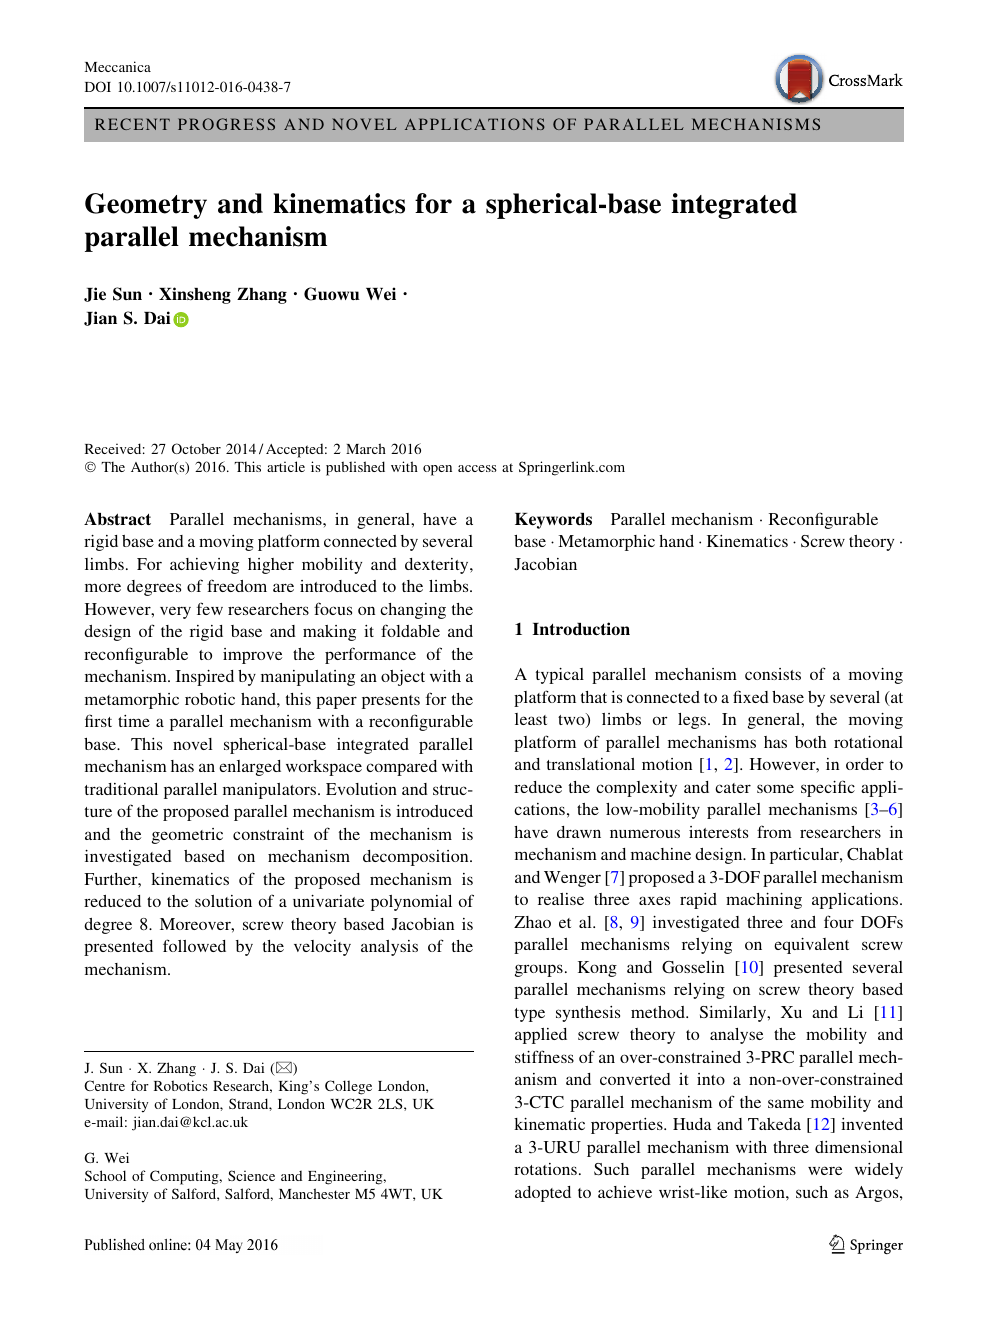 Geometry And Kinematics For A Spherical Base Integrated Parallel Mechanism Topic Of Research Paper In Mechanical Engineering Download Scholarly Article Pdf And Read For Free On Cyberleninka Open Science Hub